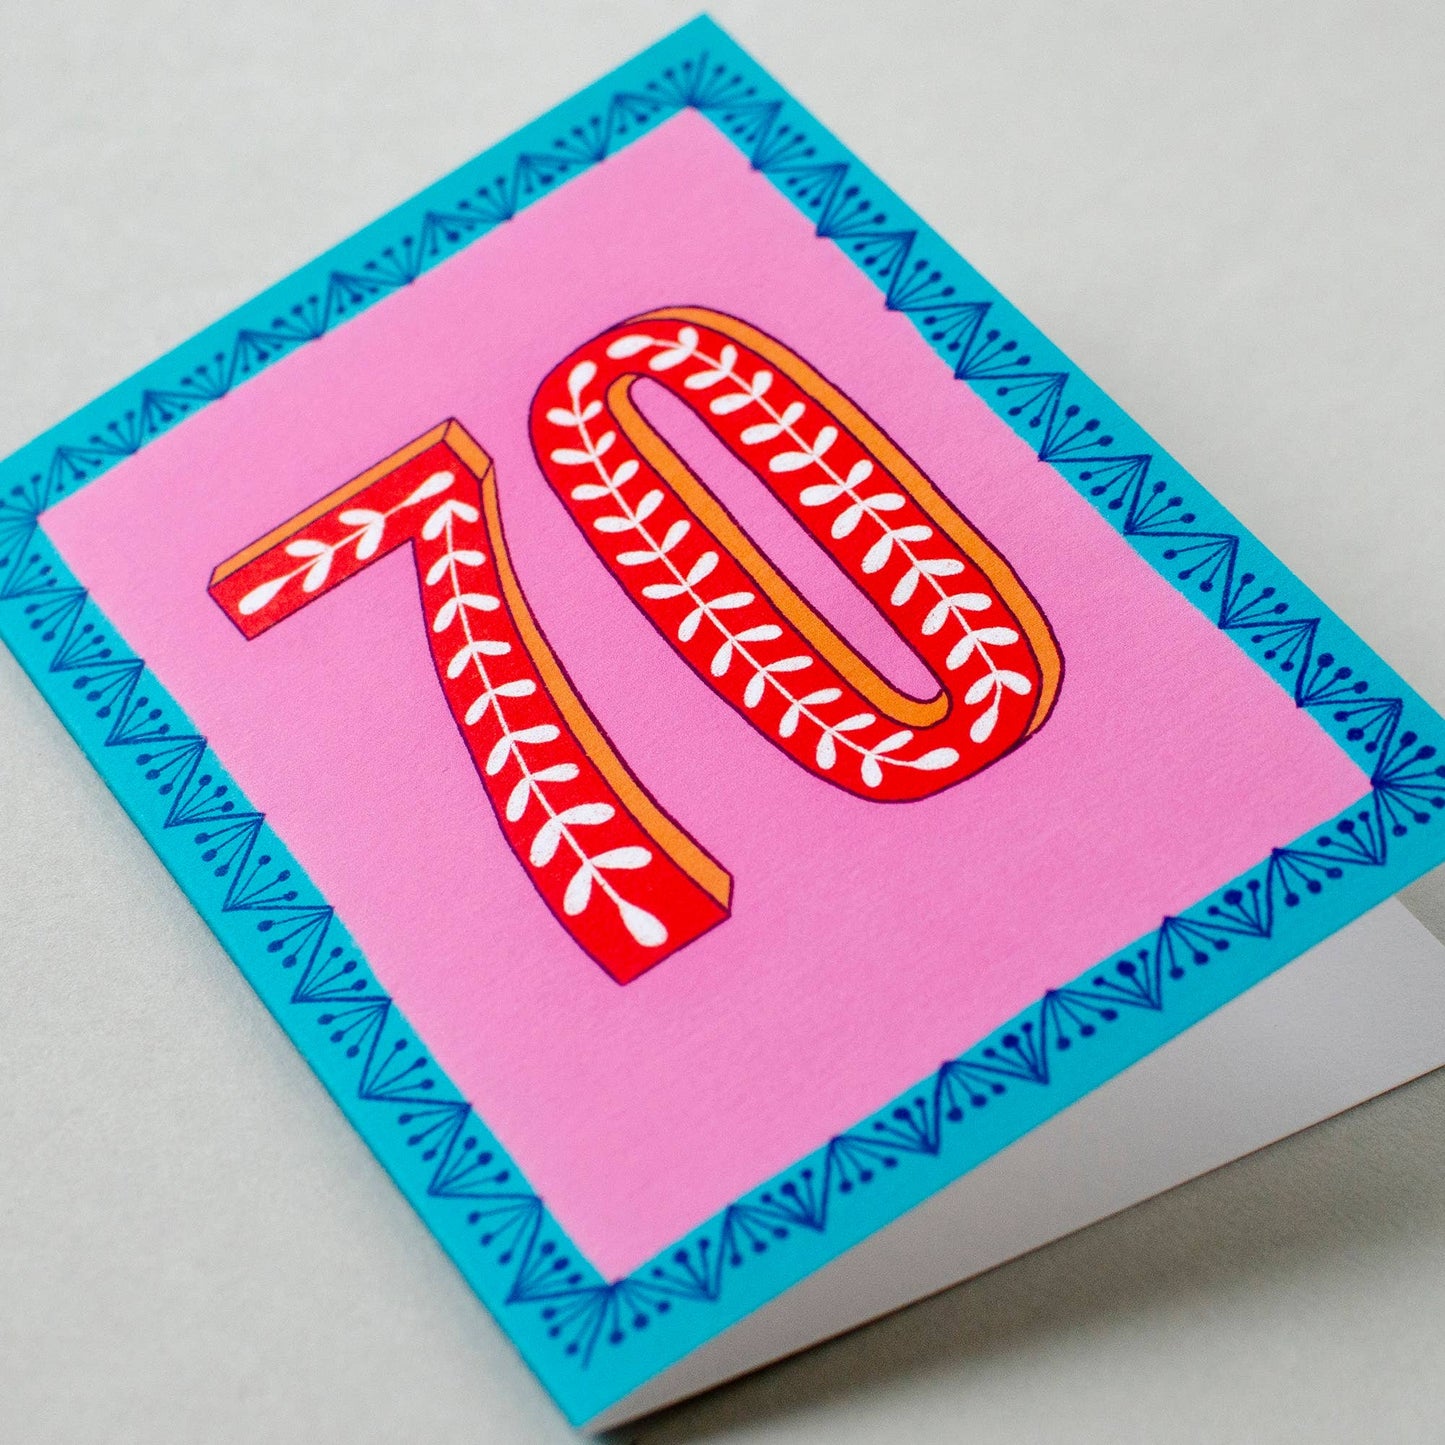 Happy 70th Birthday Greetings Card in Pink